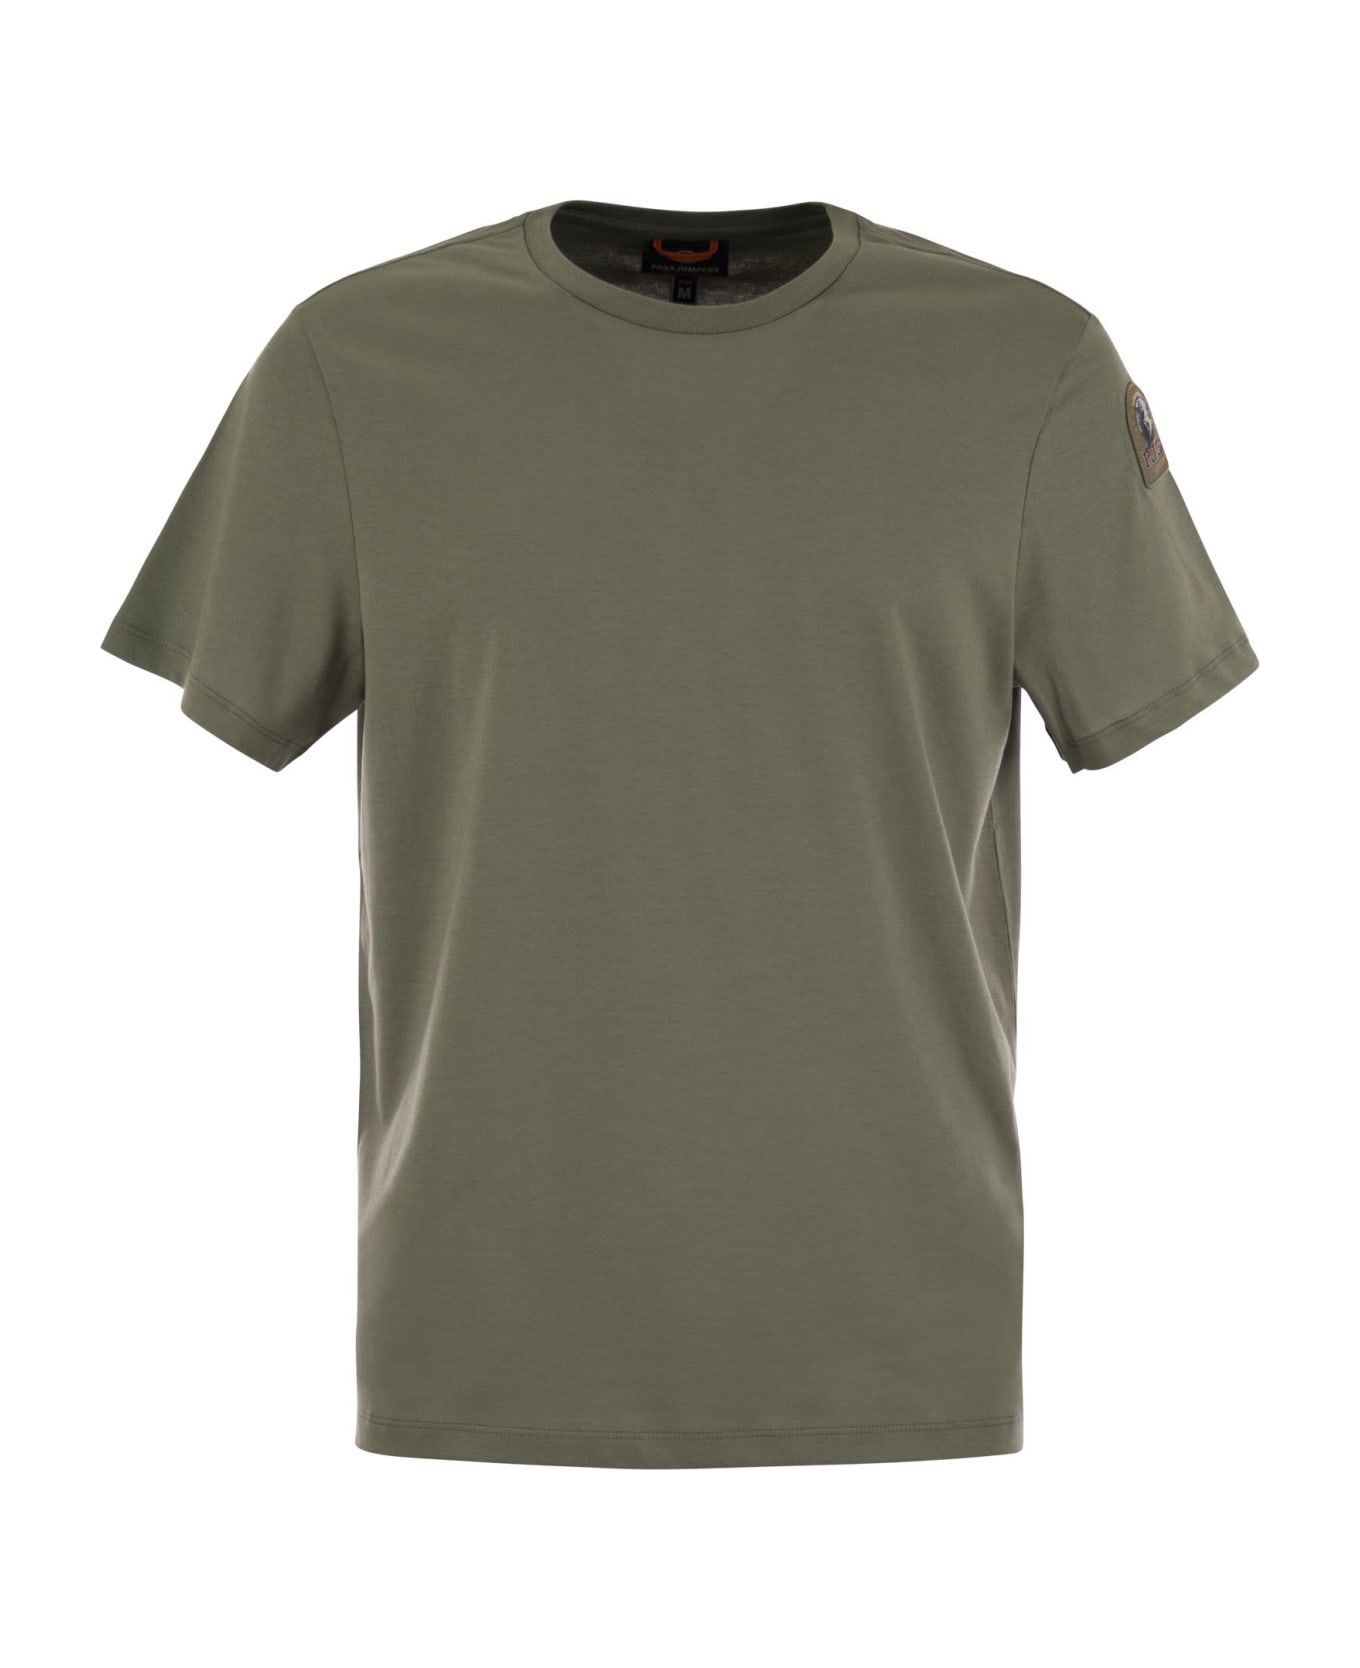 Parajumpers Shispare Tee - Cotton Jersey T-shirt - Military Green シャツ